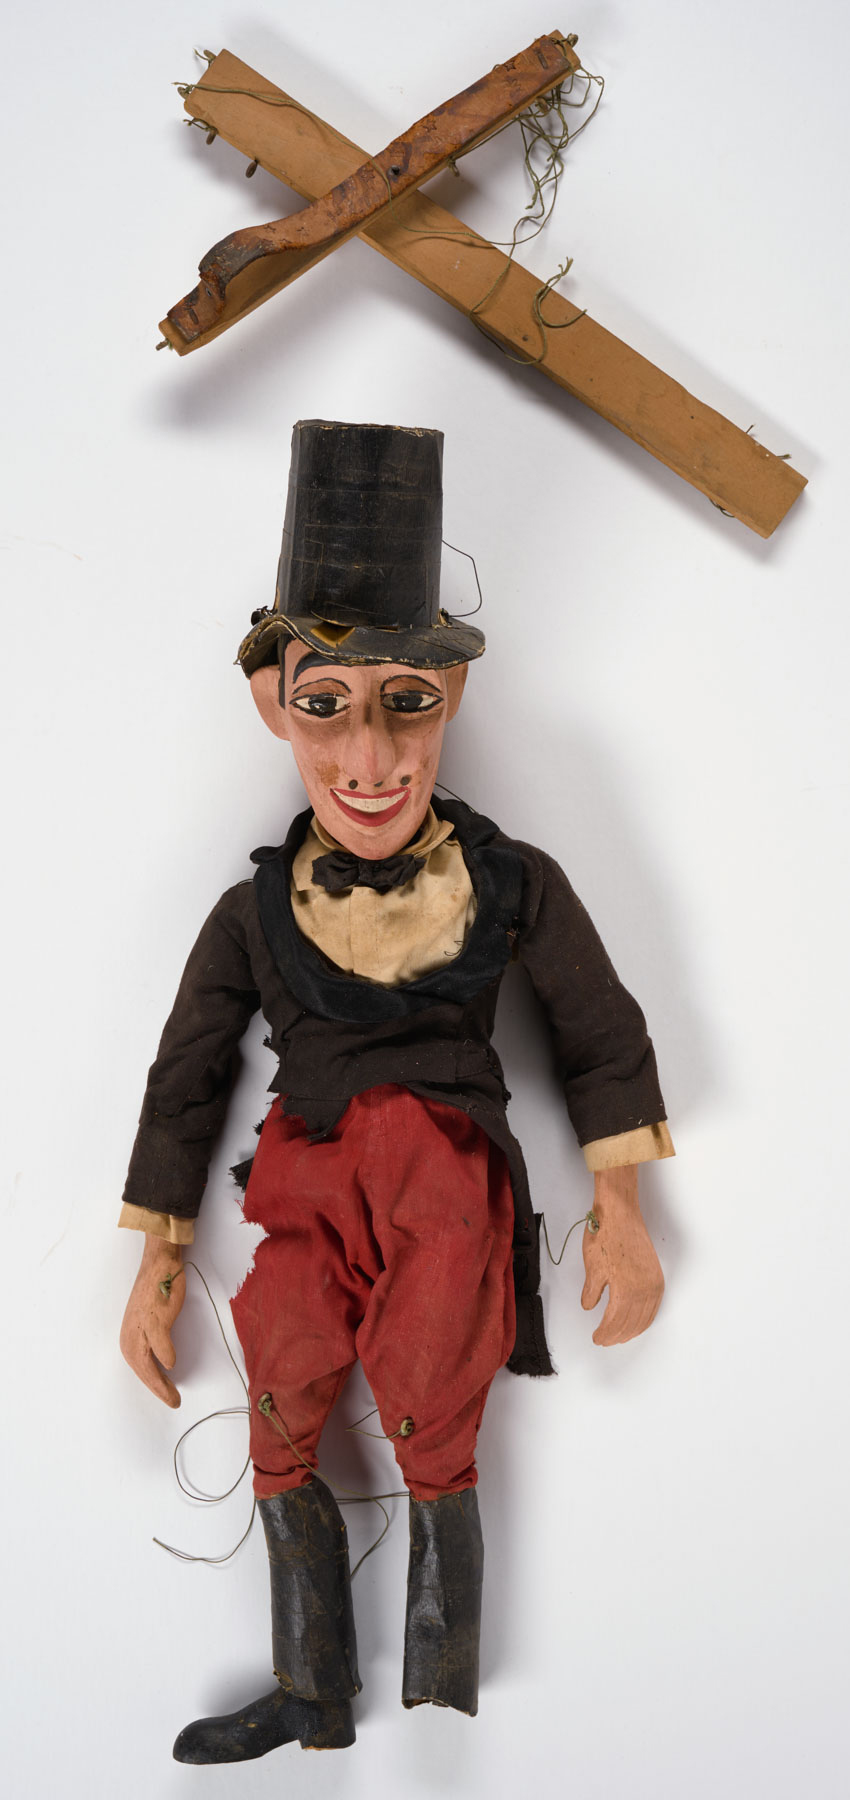 An aged marionette in a black top hat and jacket, red pants, and tall black boots, one of which is missing a foot.